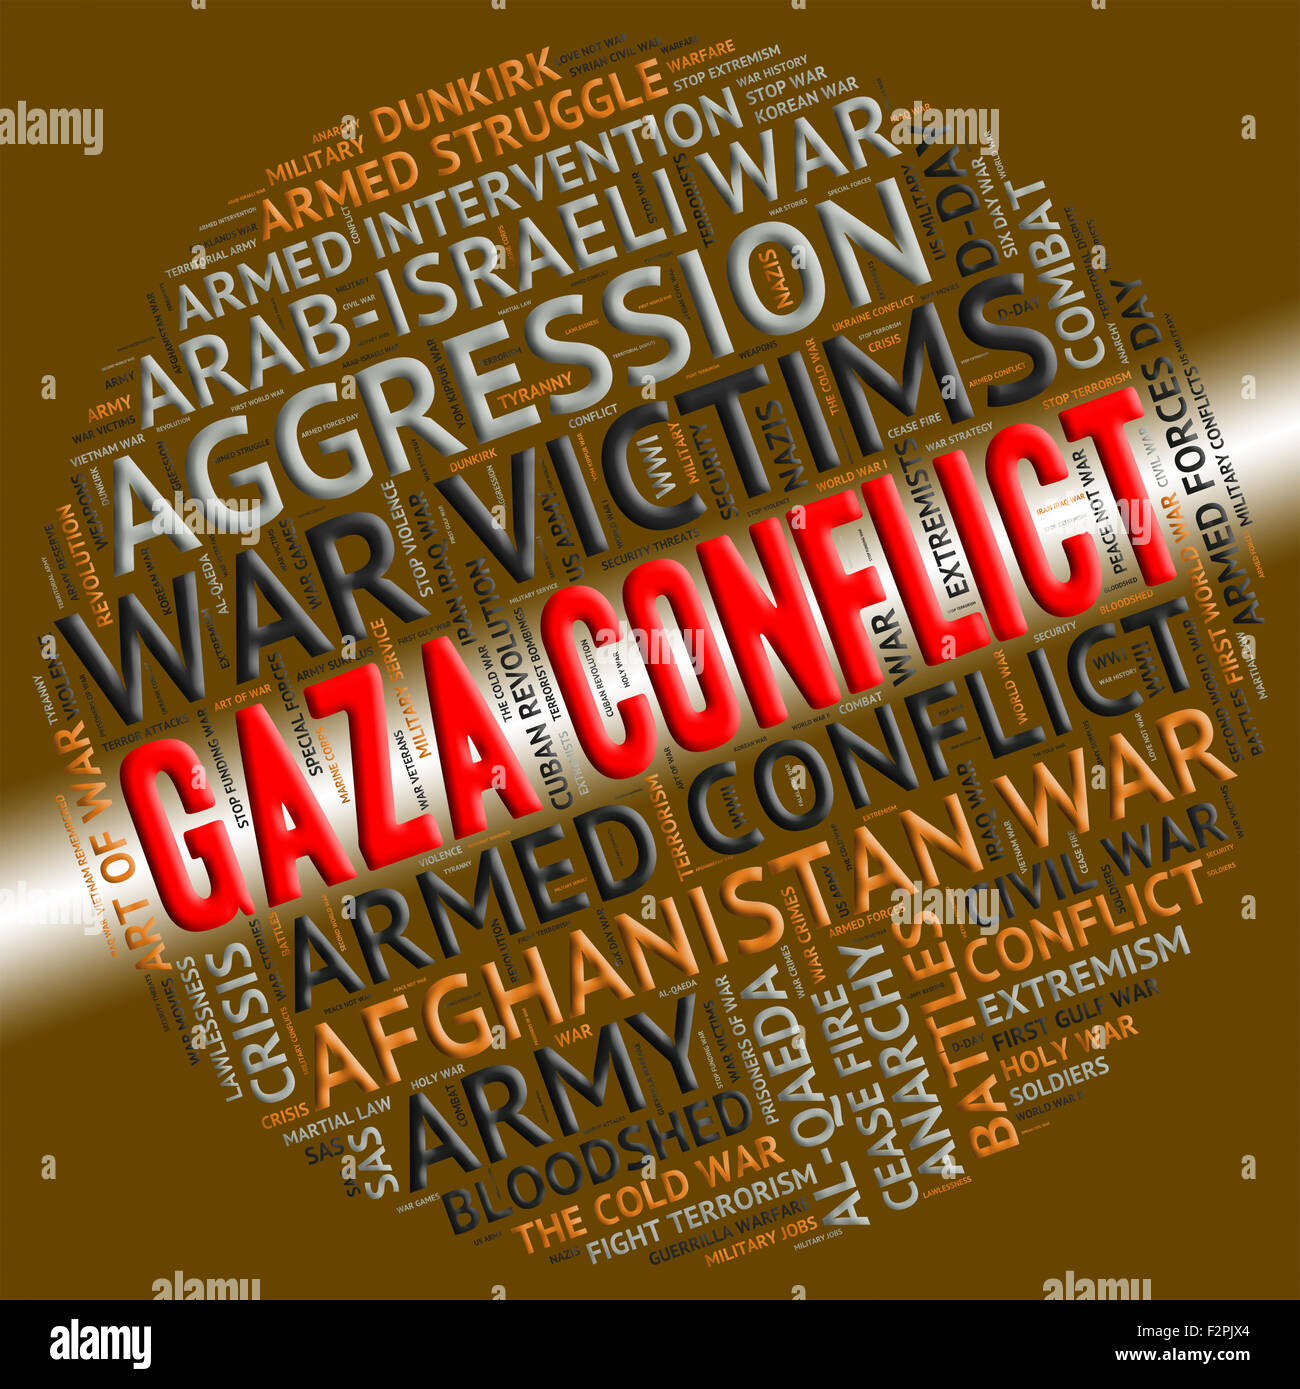 Gaza Conflict Meaning Armed Conflicts And Fighting Stock Photo